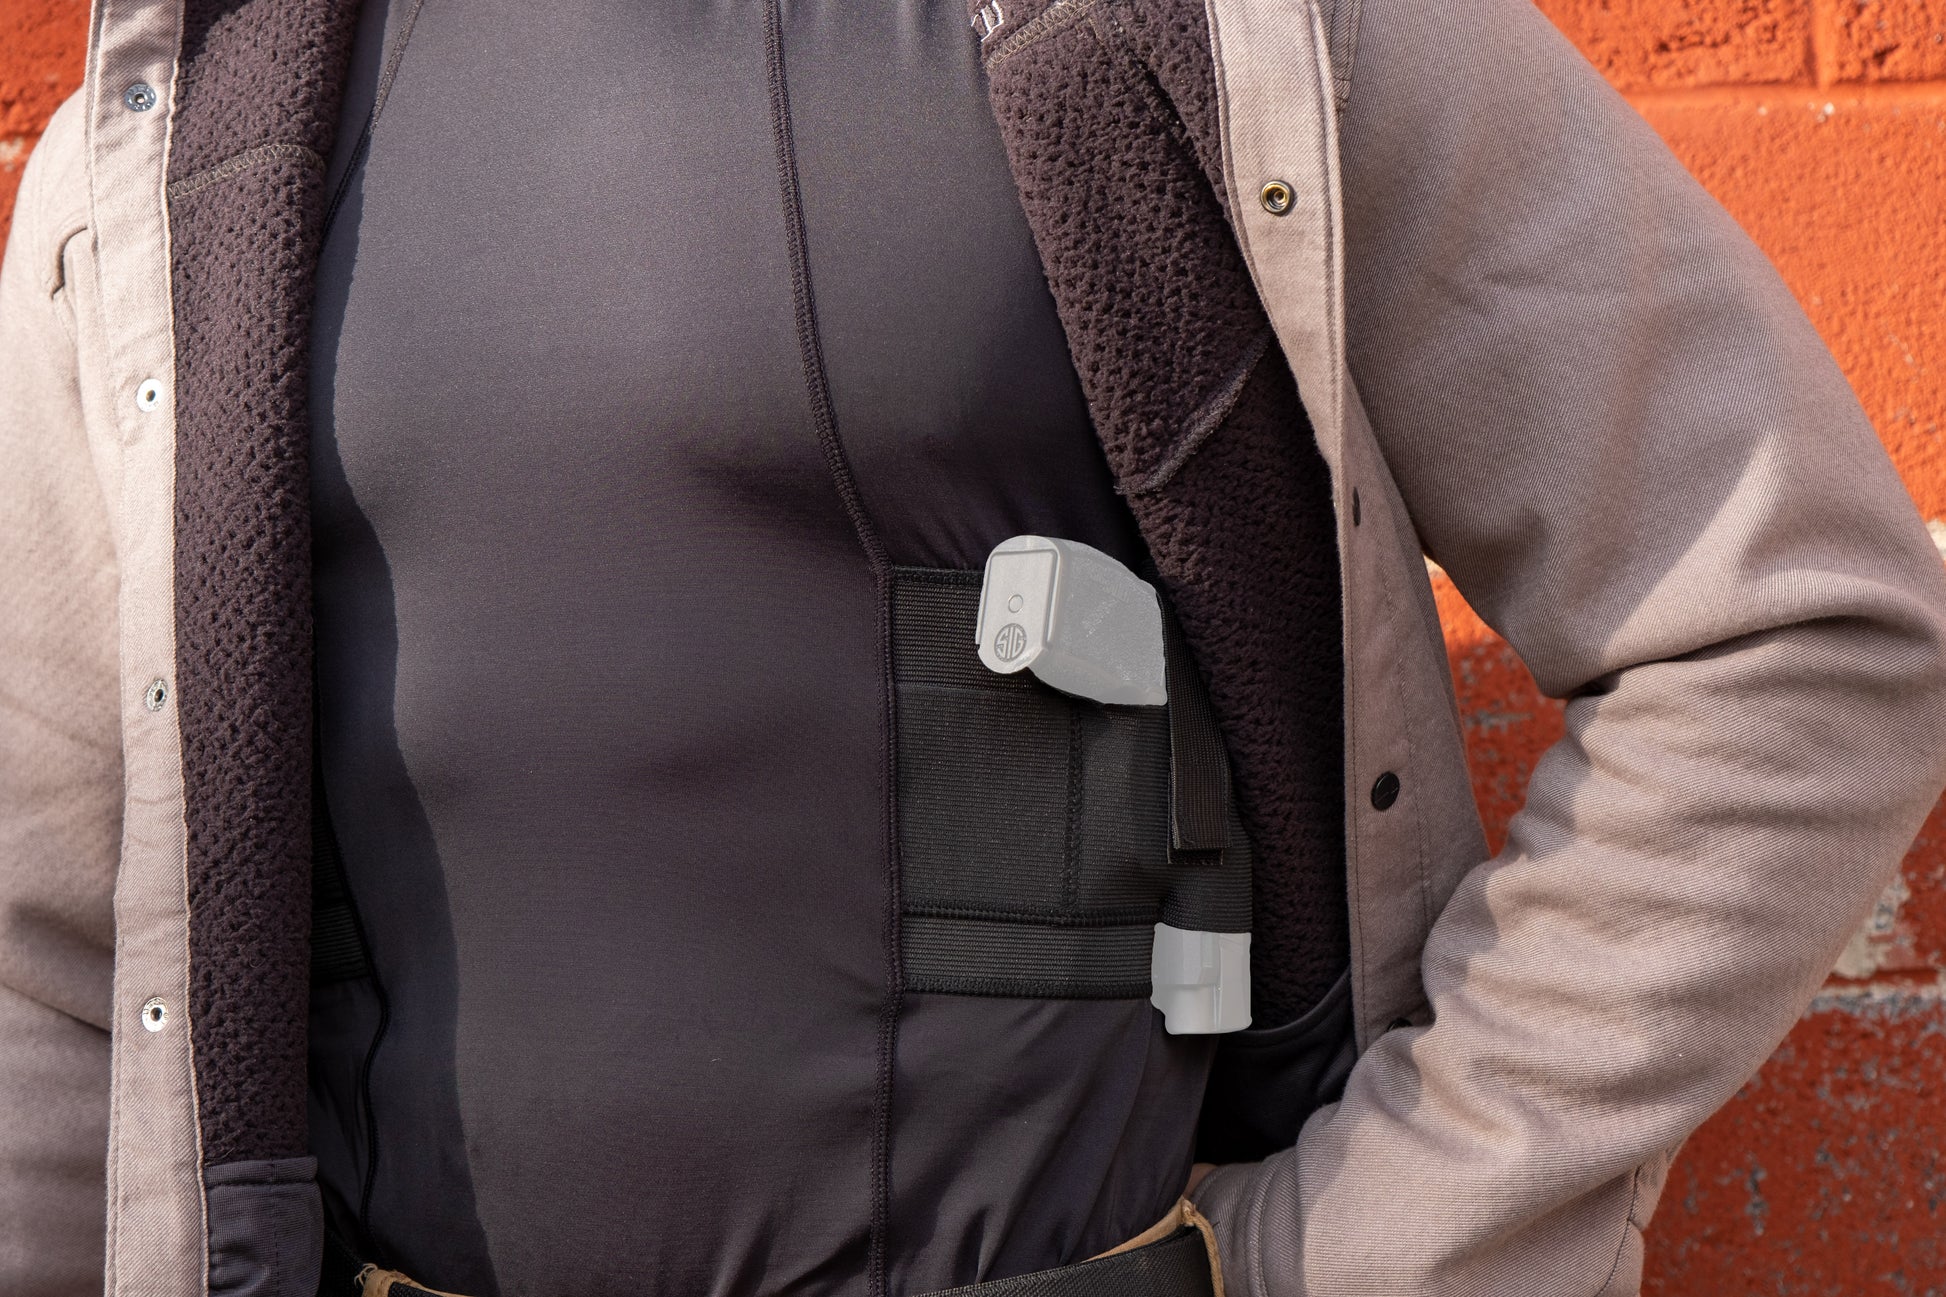 Concealed Carry Shirt - Concealed Carry Outlet